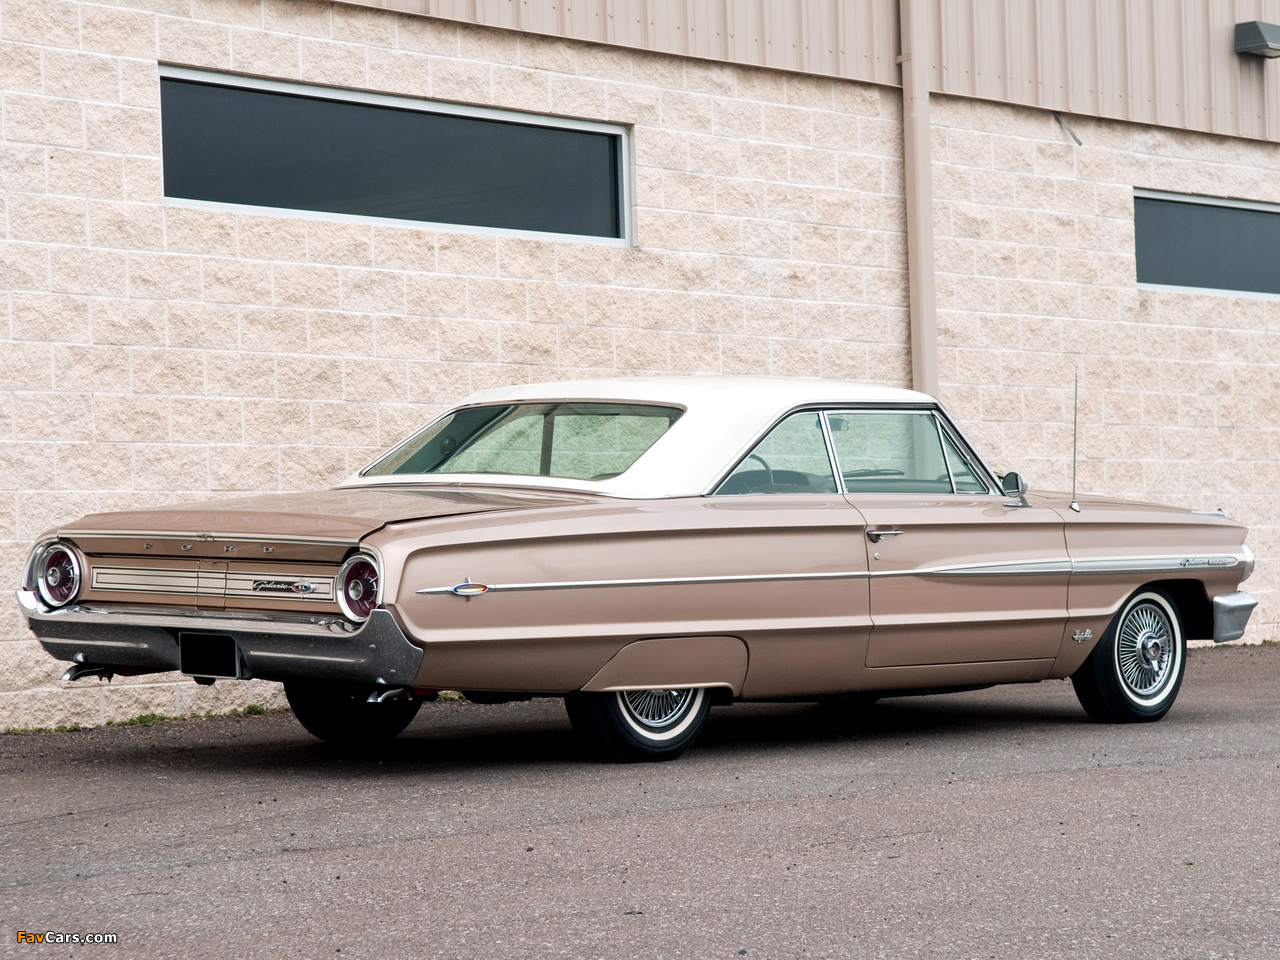 Images of Ford Galaxie 500 XL Hardtop Coupe 1964 (1280 x 960)